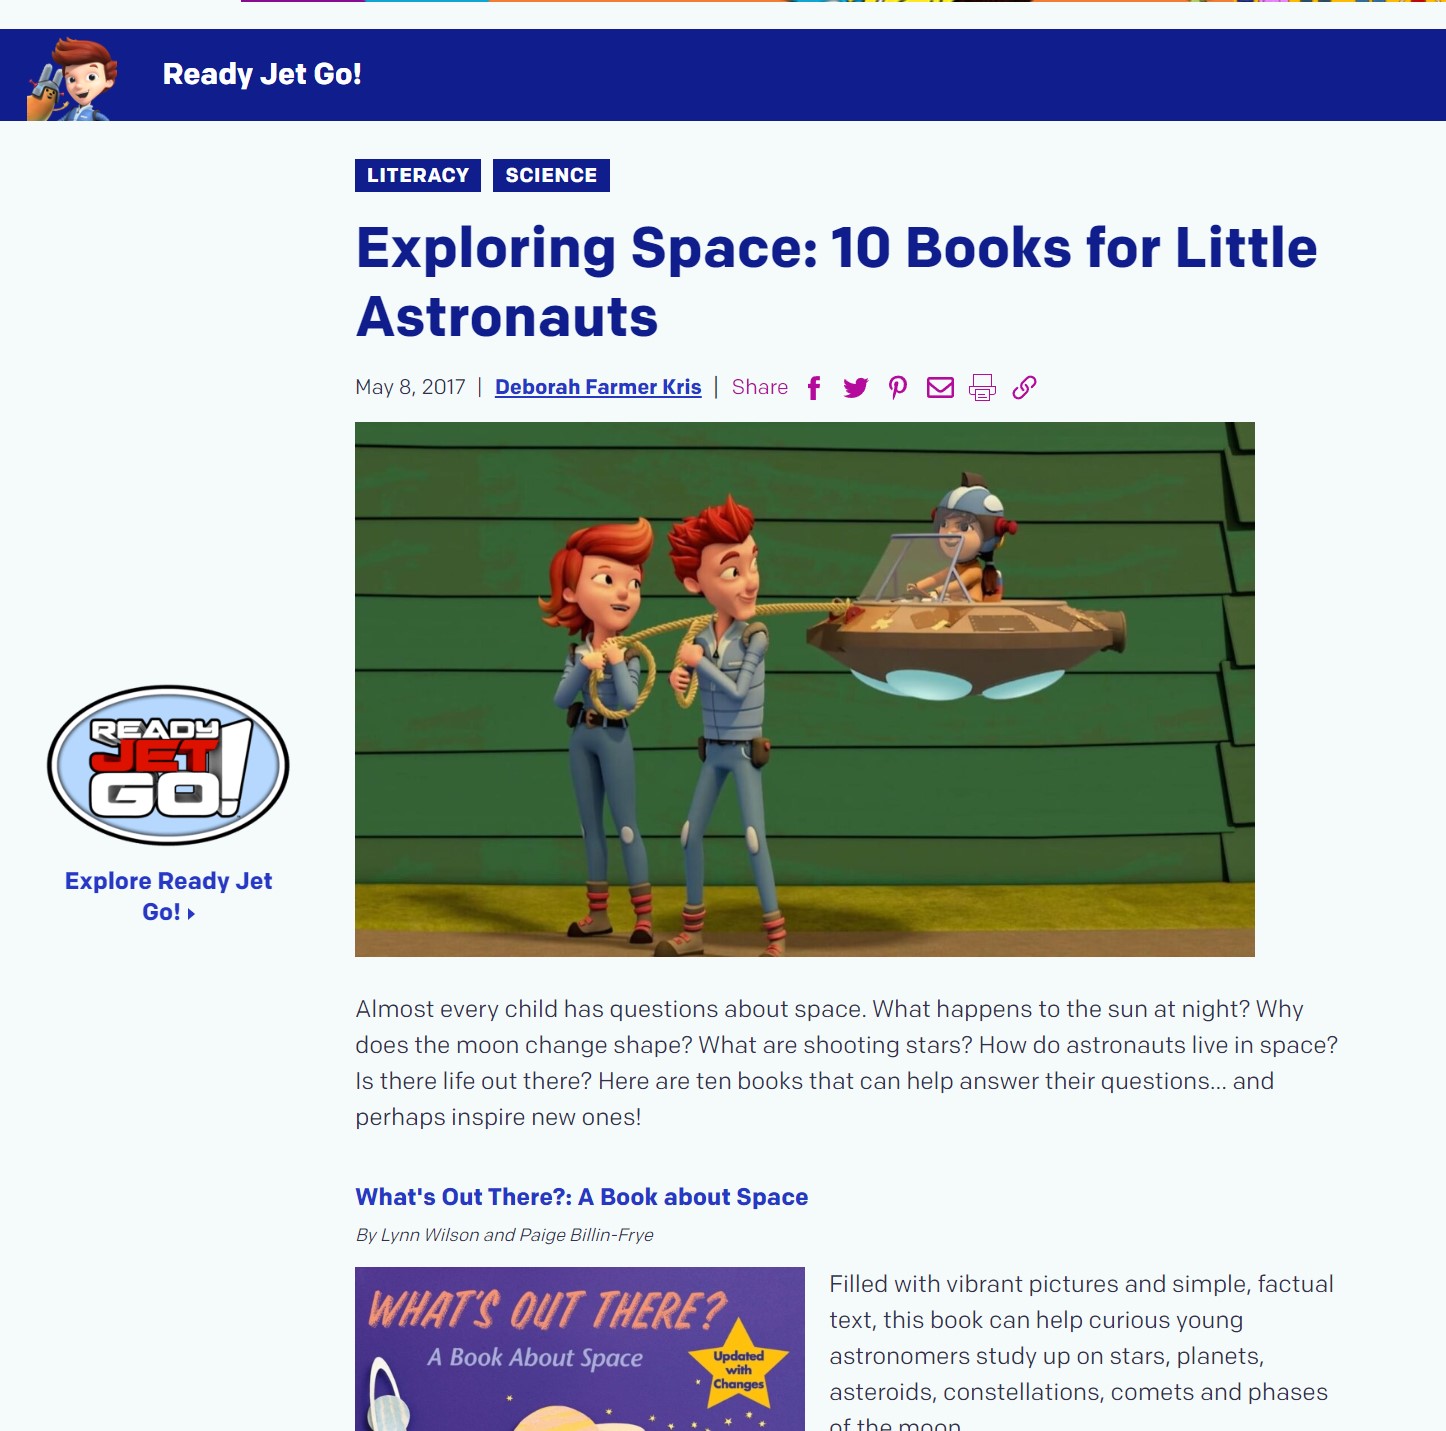 Exploring Space: 10 Books for Little Astronauts